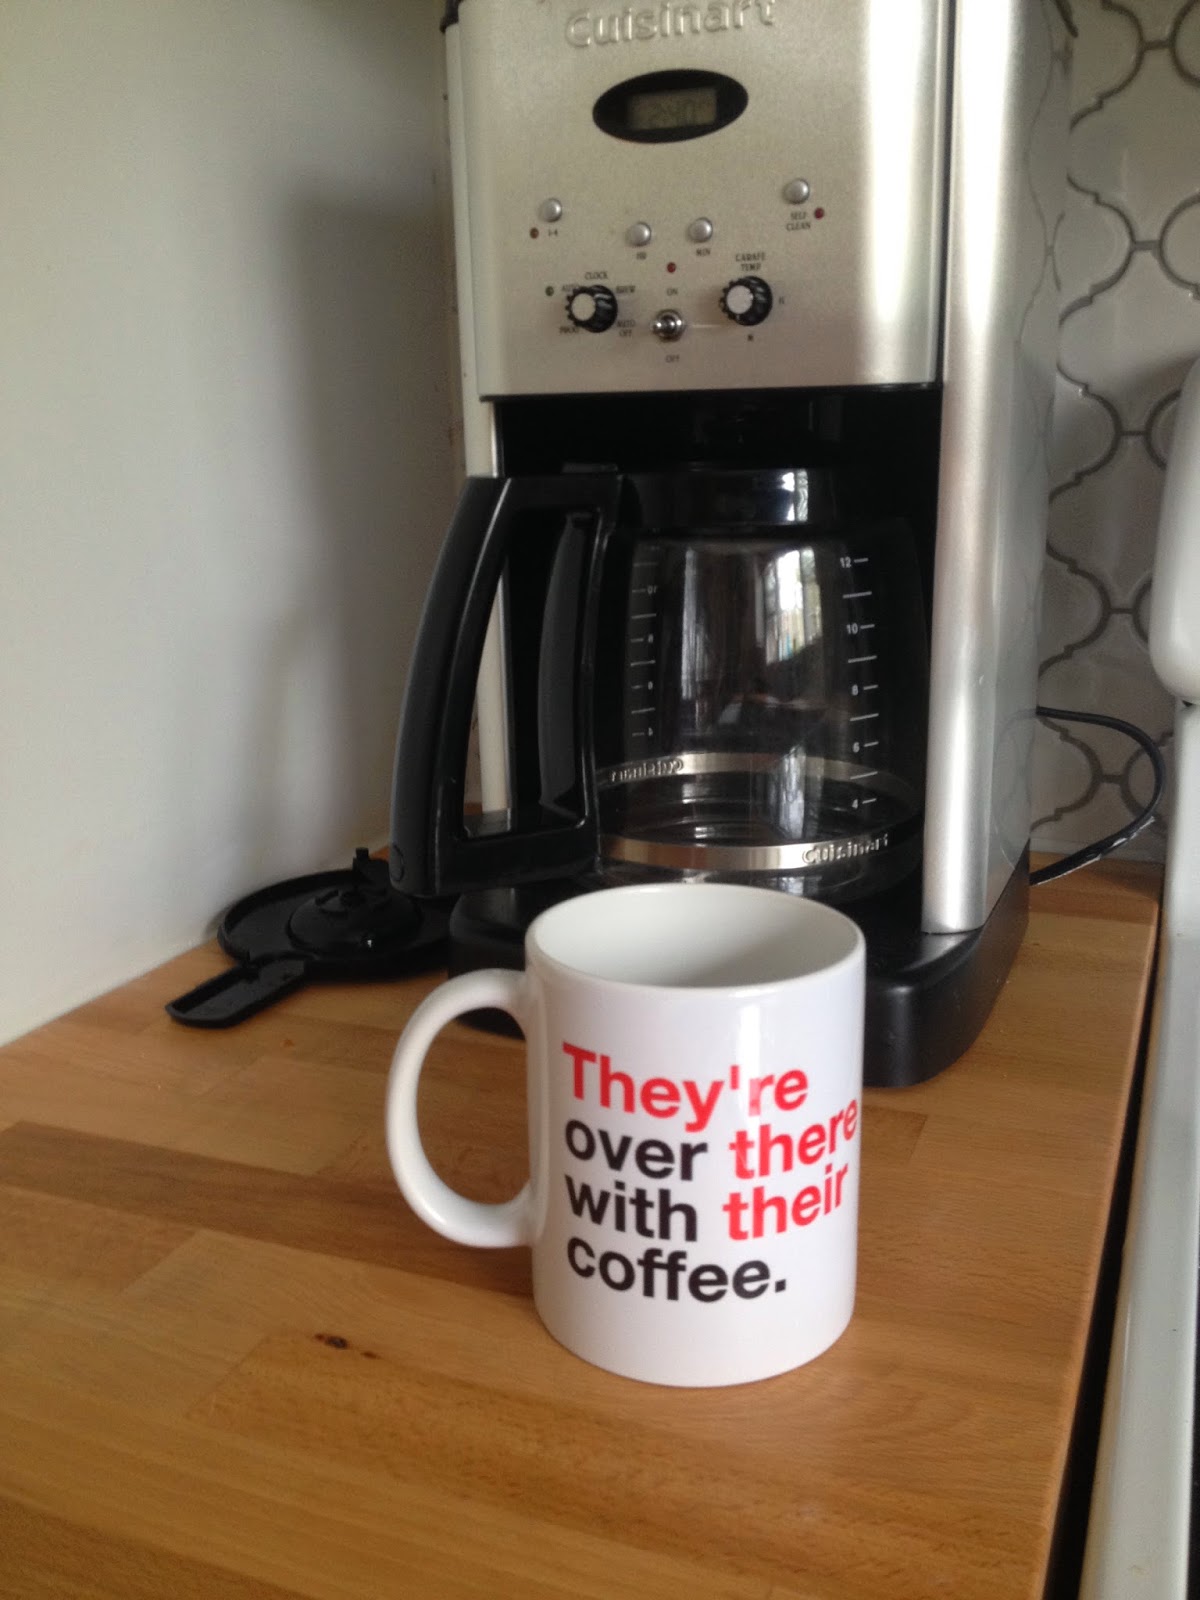 http://www.zazzle.com/grammar_geek_theyre_there_their_coffee_mugs-168759867777268535